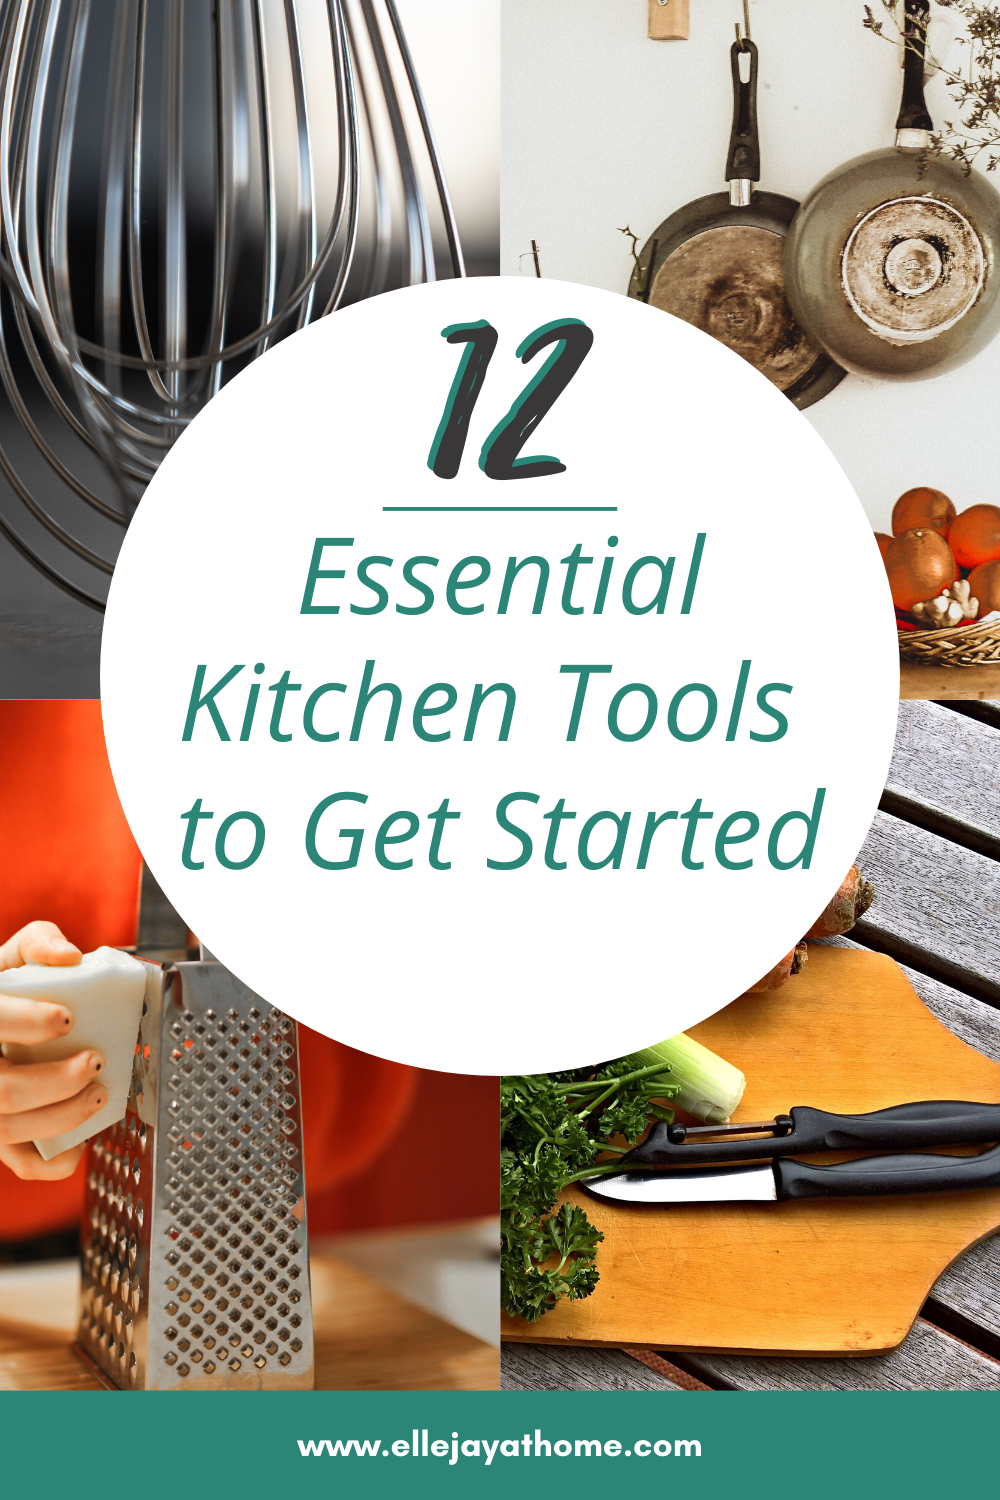 12 Essential Kitchen Tools to Get Started